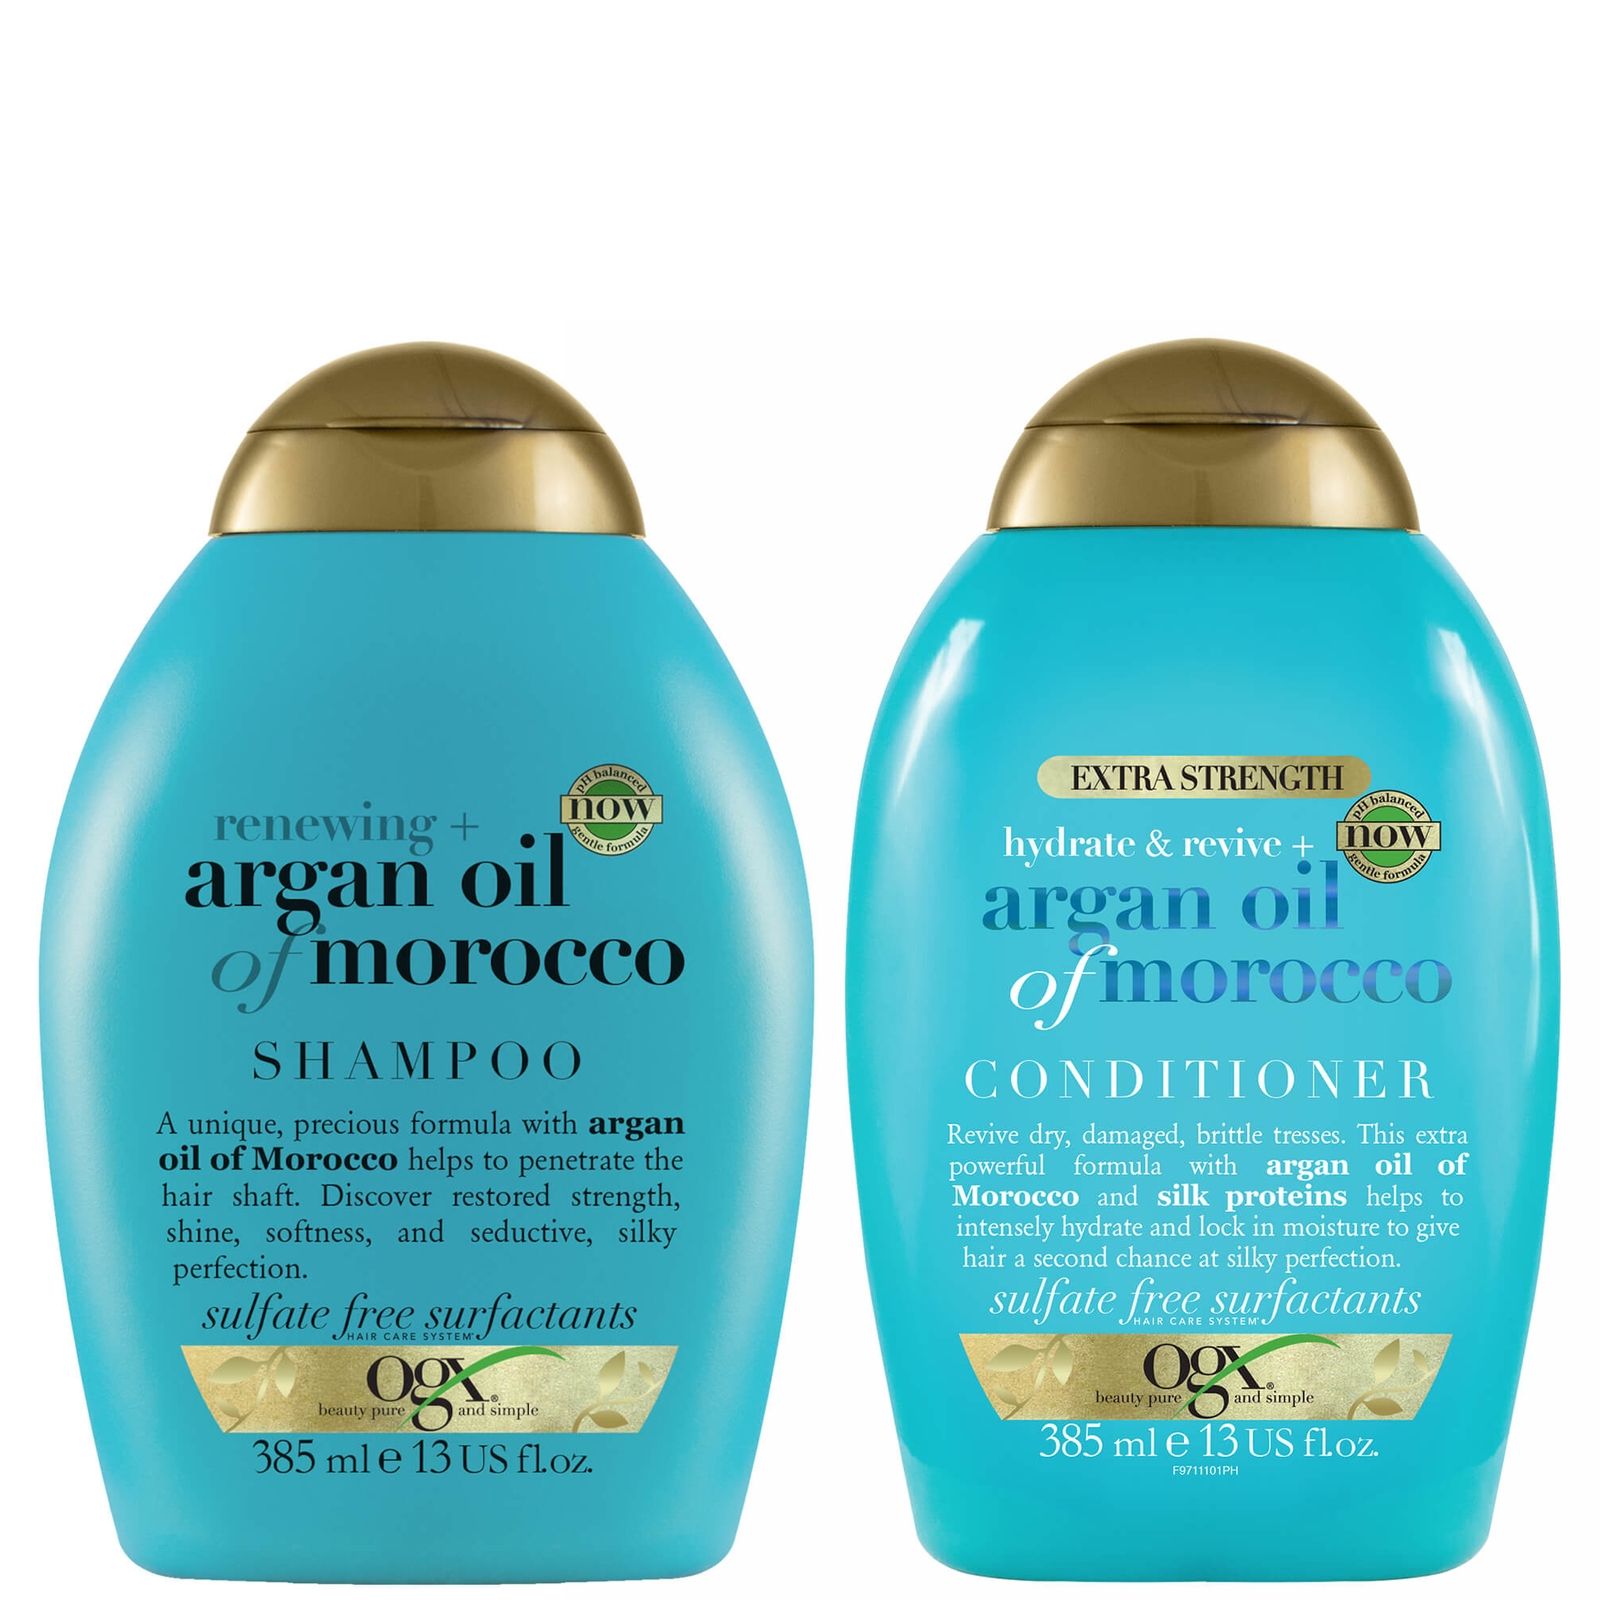 Shop Ogx Renewing+ Argan Oil Of Morocco Shampoo And Conditioner Bundle For Shiny Hair